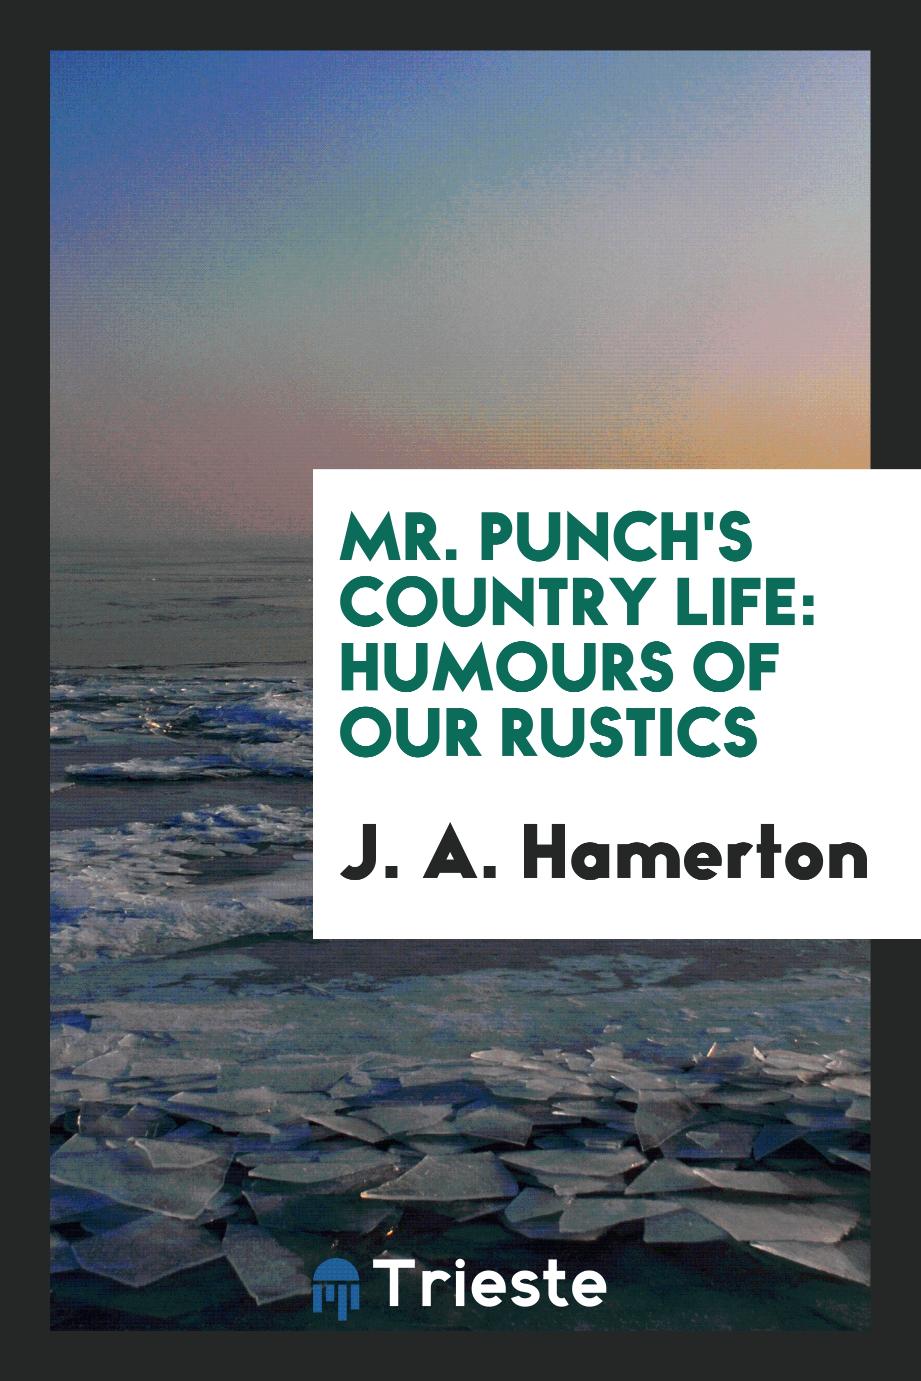 Mr. Punch's country life: humours of our rustics